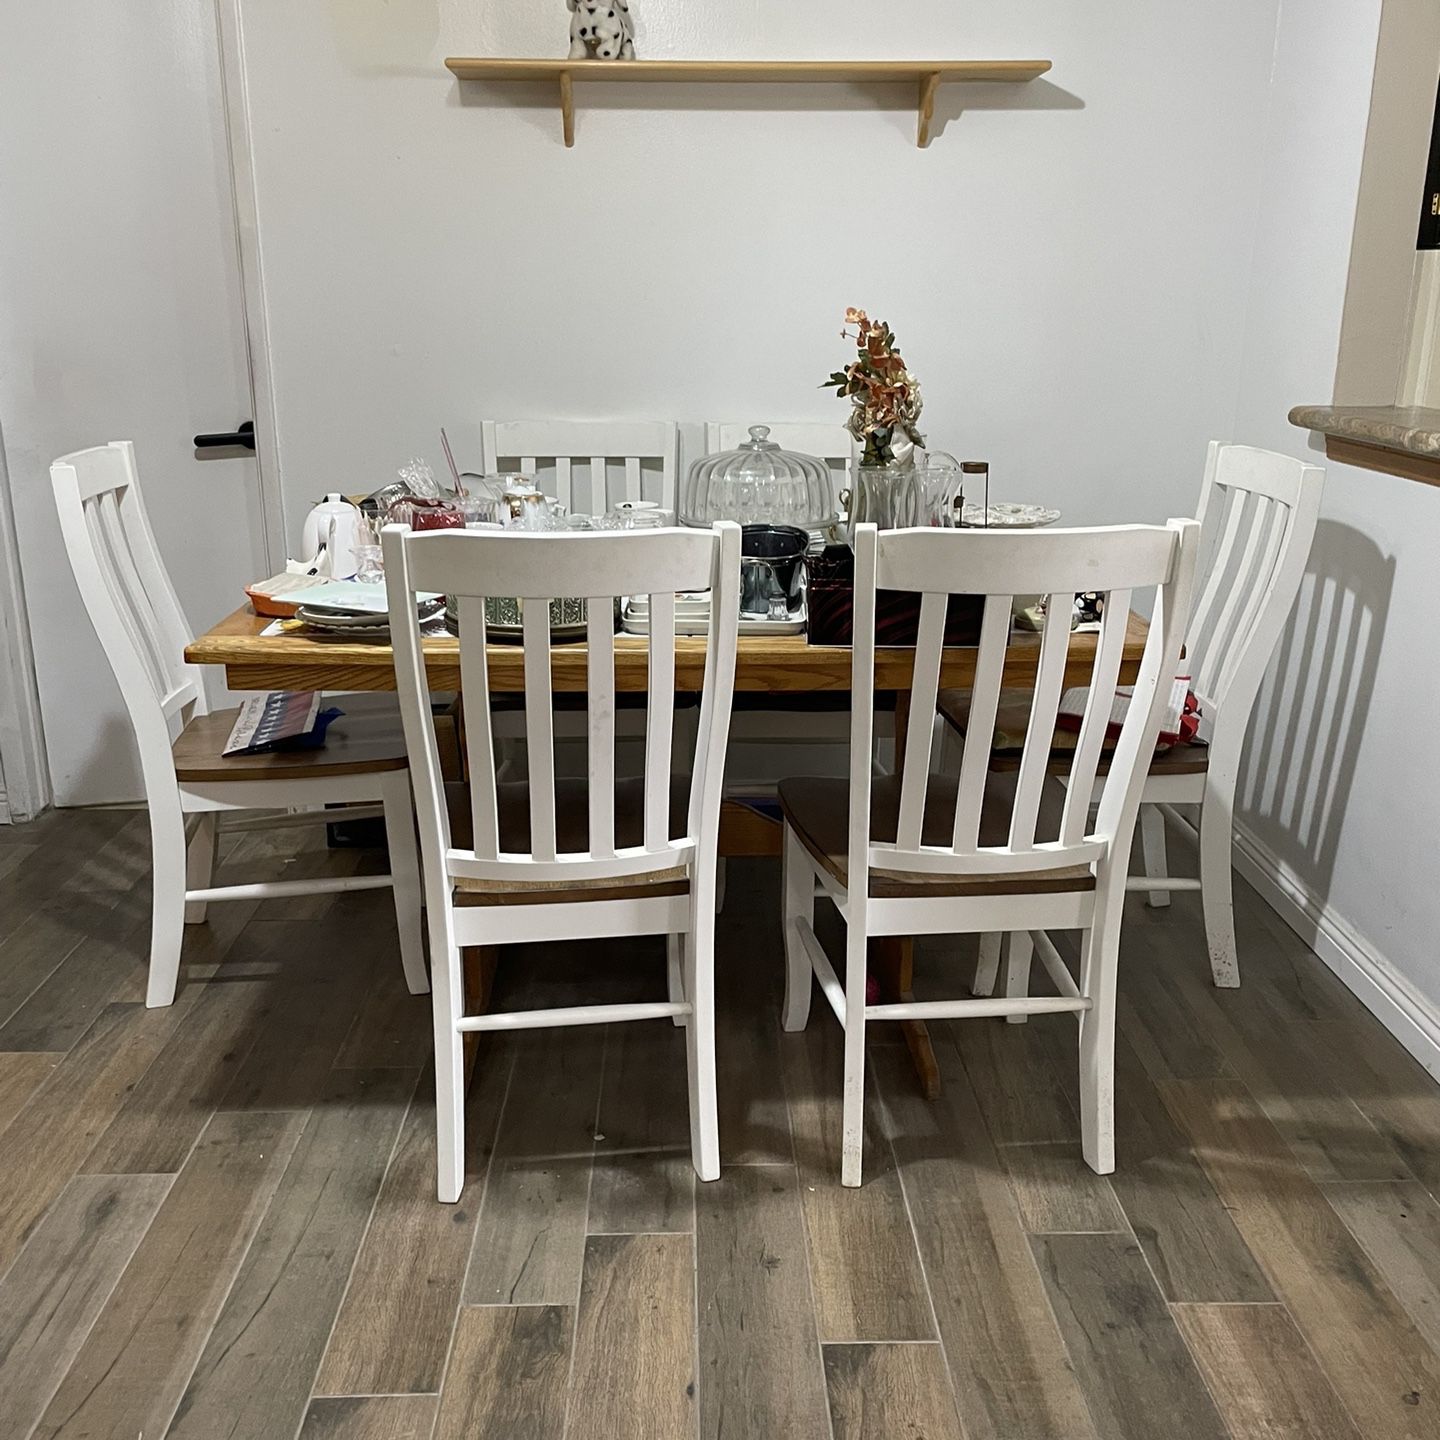 6 Chairs And Kitchen table Wooden